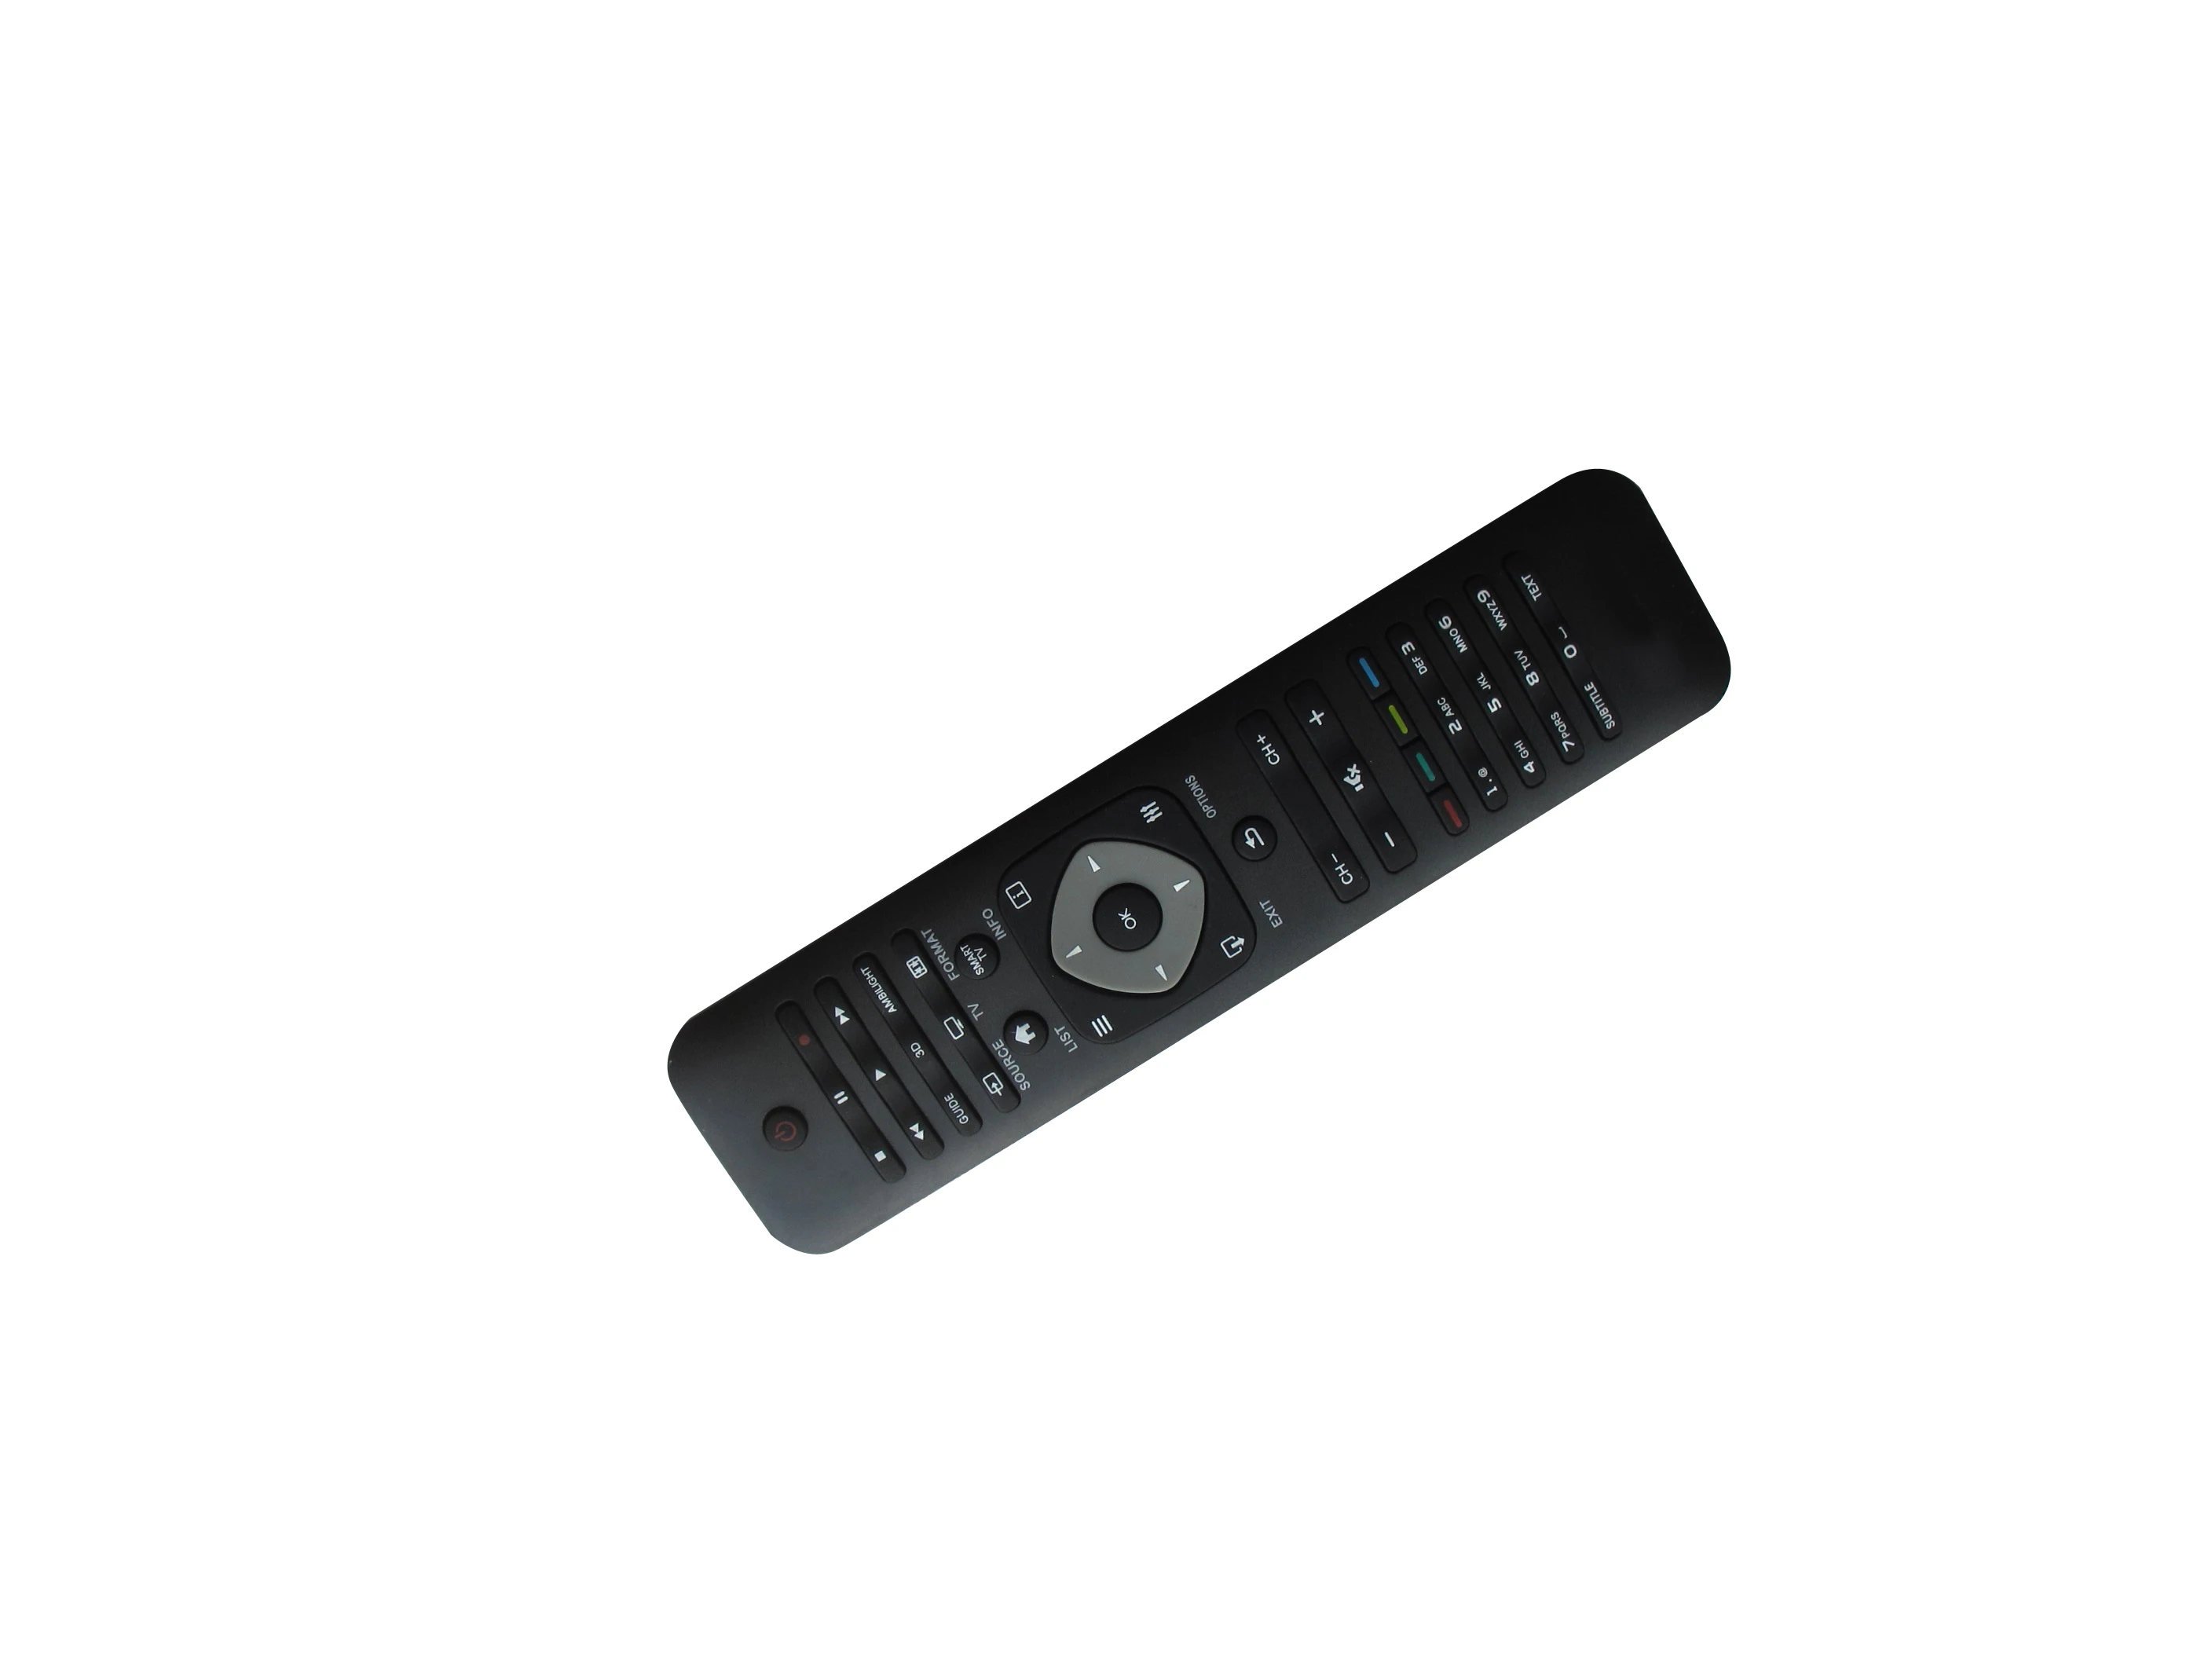 snow Integration And Remote Control For Philips 55PFL6198 55PFL6678 60PFL6008 42PFL4007H/12  42PFL4007T/12 47PFL4007H/12 Smart 3D LED HDTV TV - AliExpress Consumer  Electronics